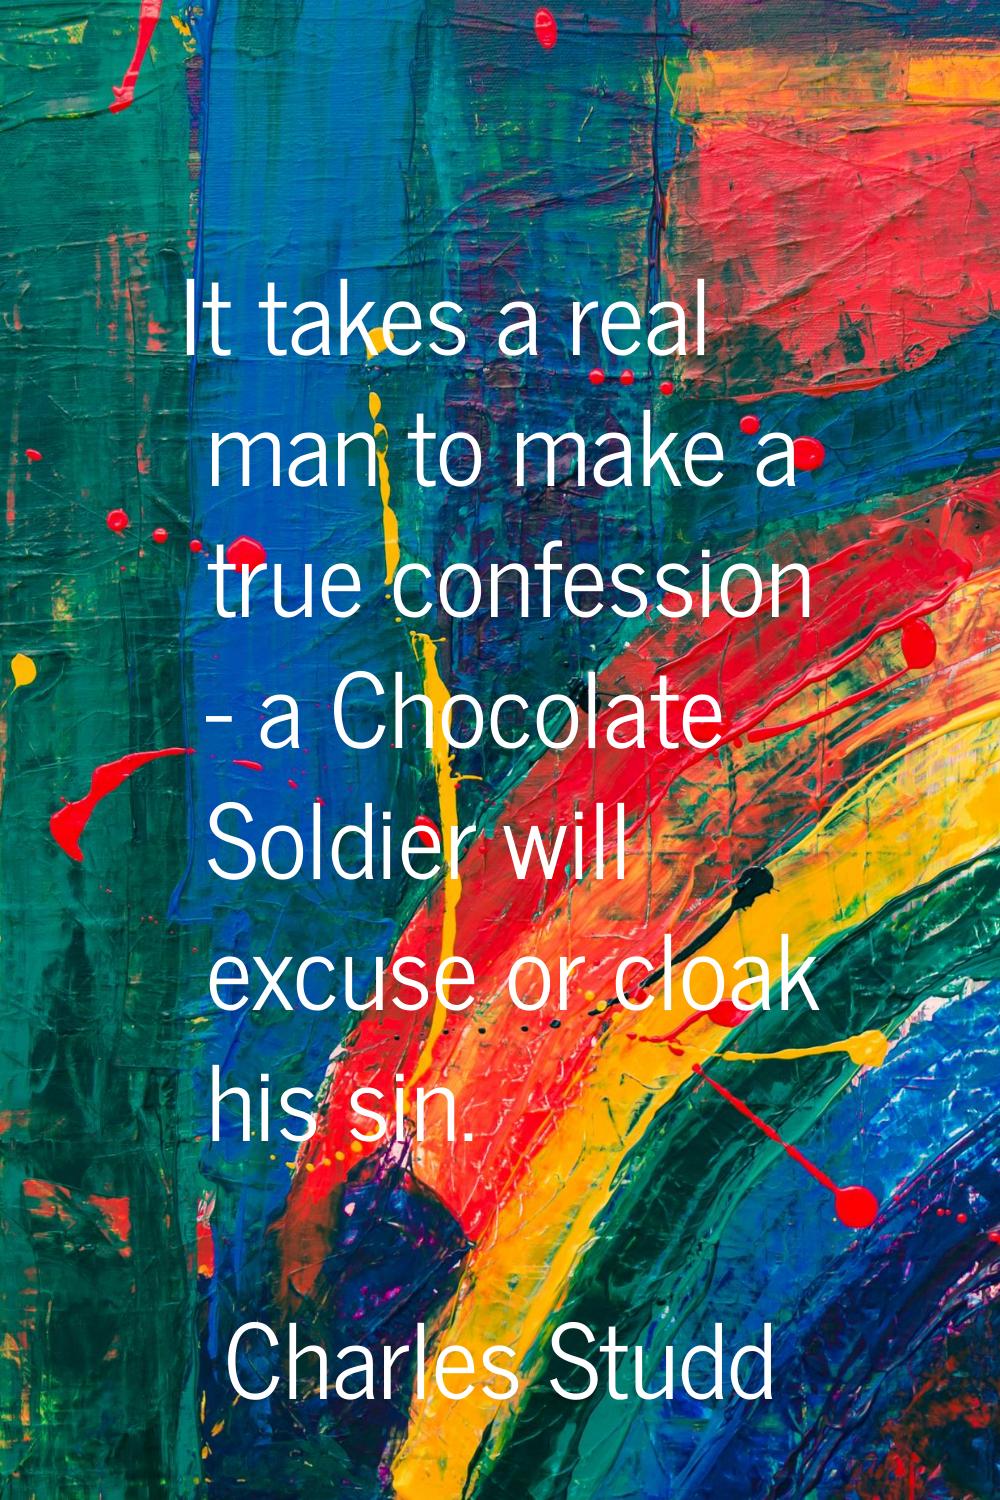 It takes a real man to make a true confession - a Chocolate Soldier will excuse or cloak his sin.